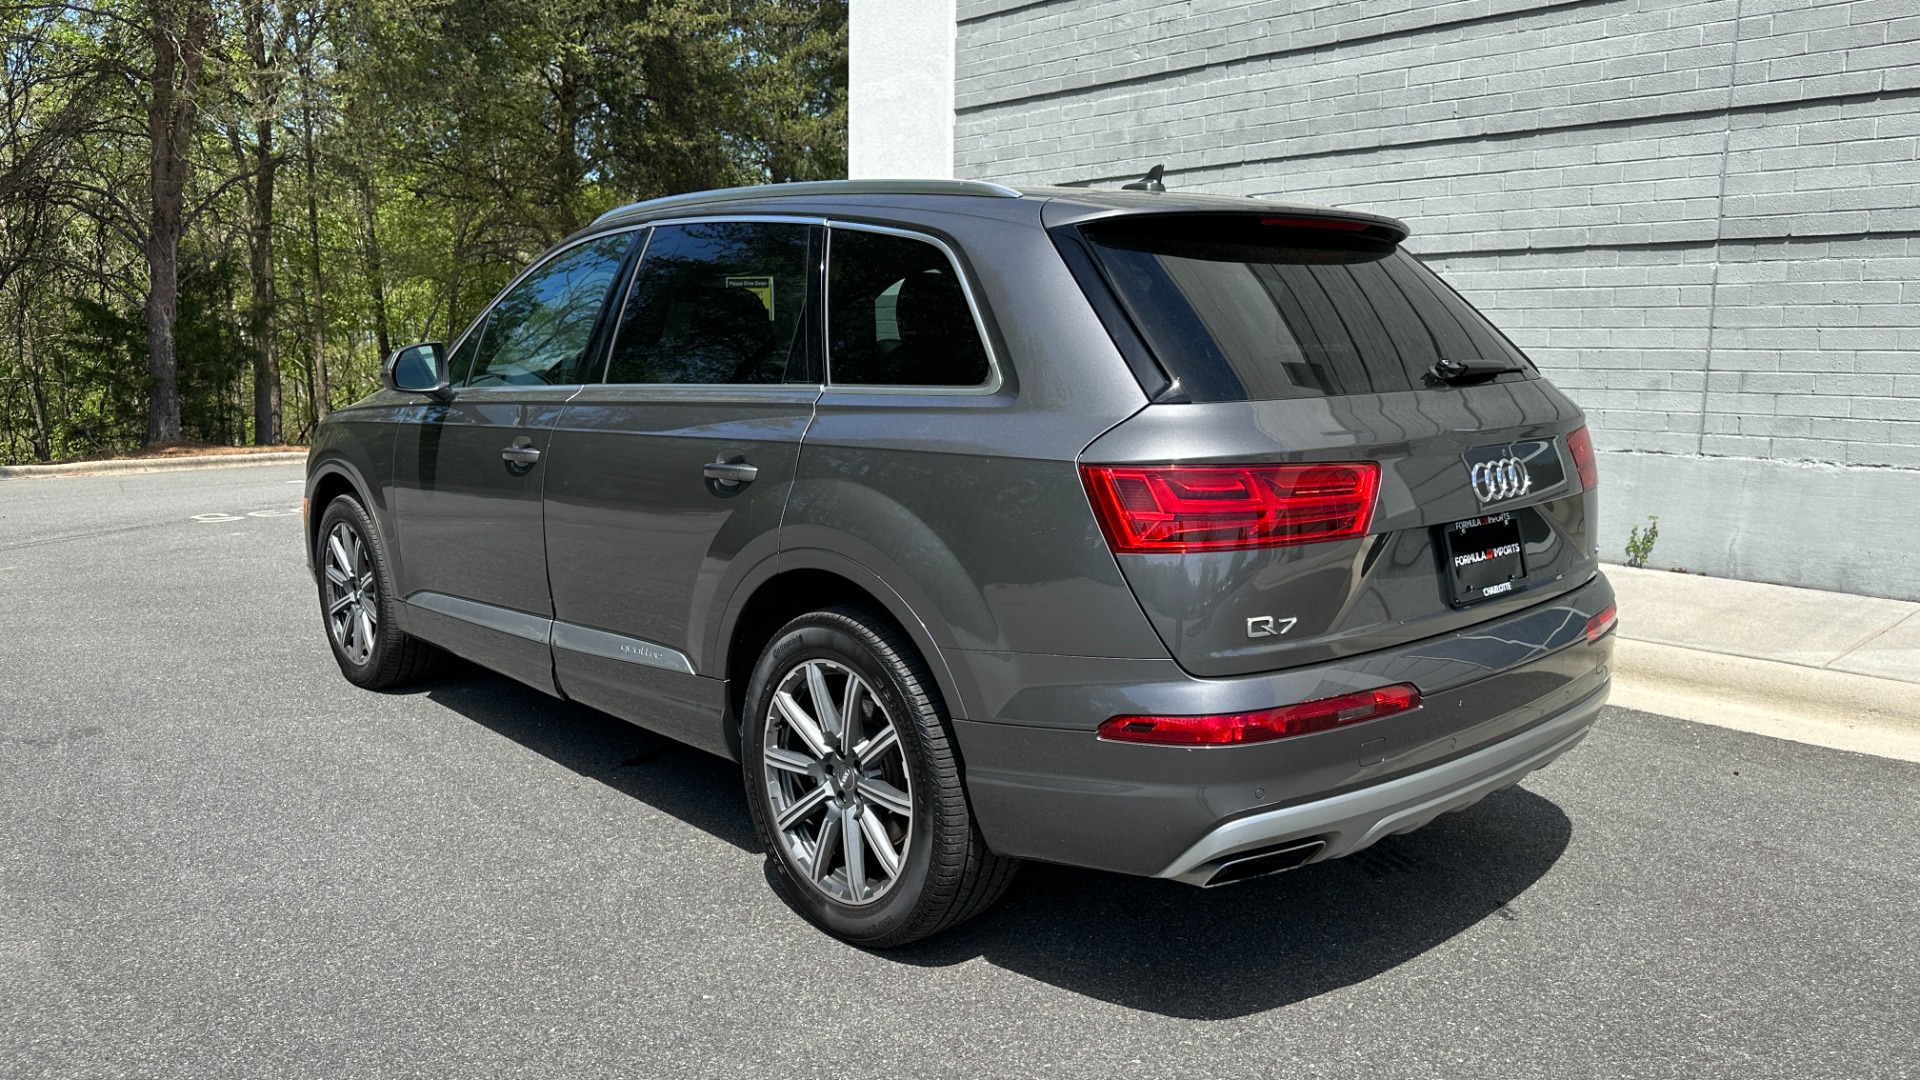 Used 2019 Audi Q7 PREMIUM PLUS / COLD WEATHER PACKAGE / LEATHER / SUNSHADES / NAV for sale $36,995 at Formula Imports in Charlotte NC 28227 4